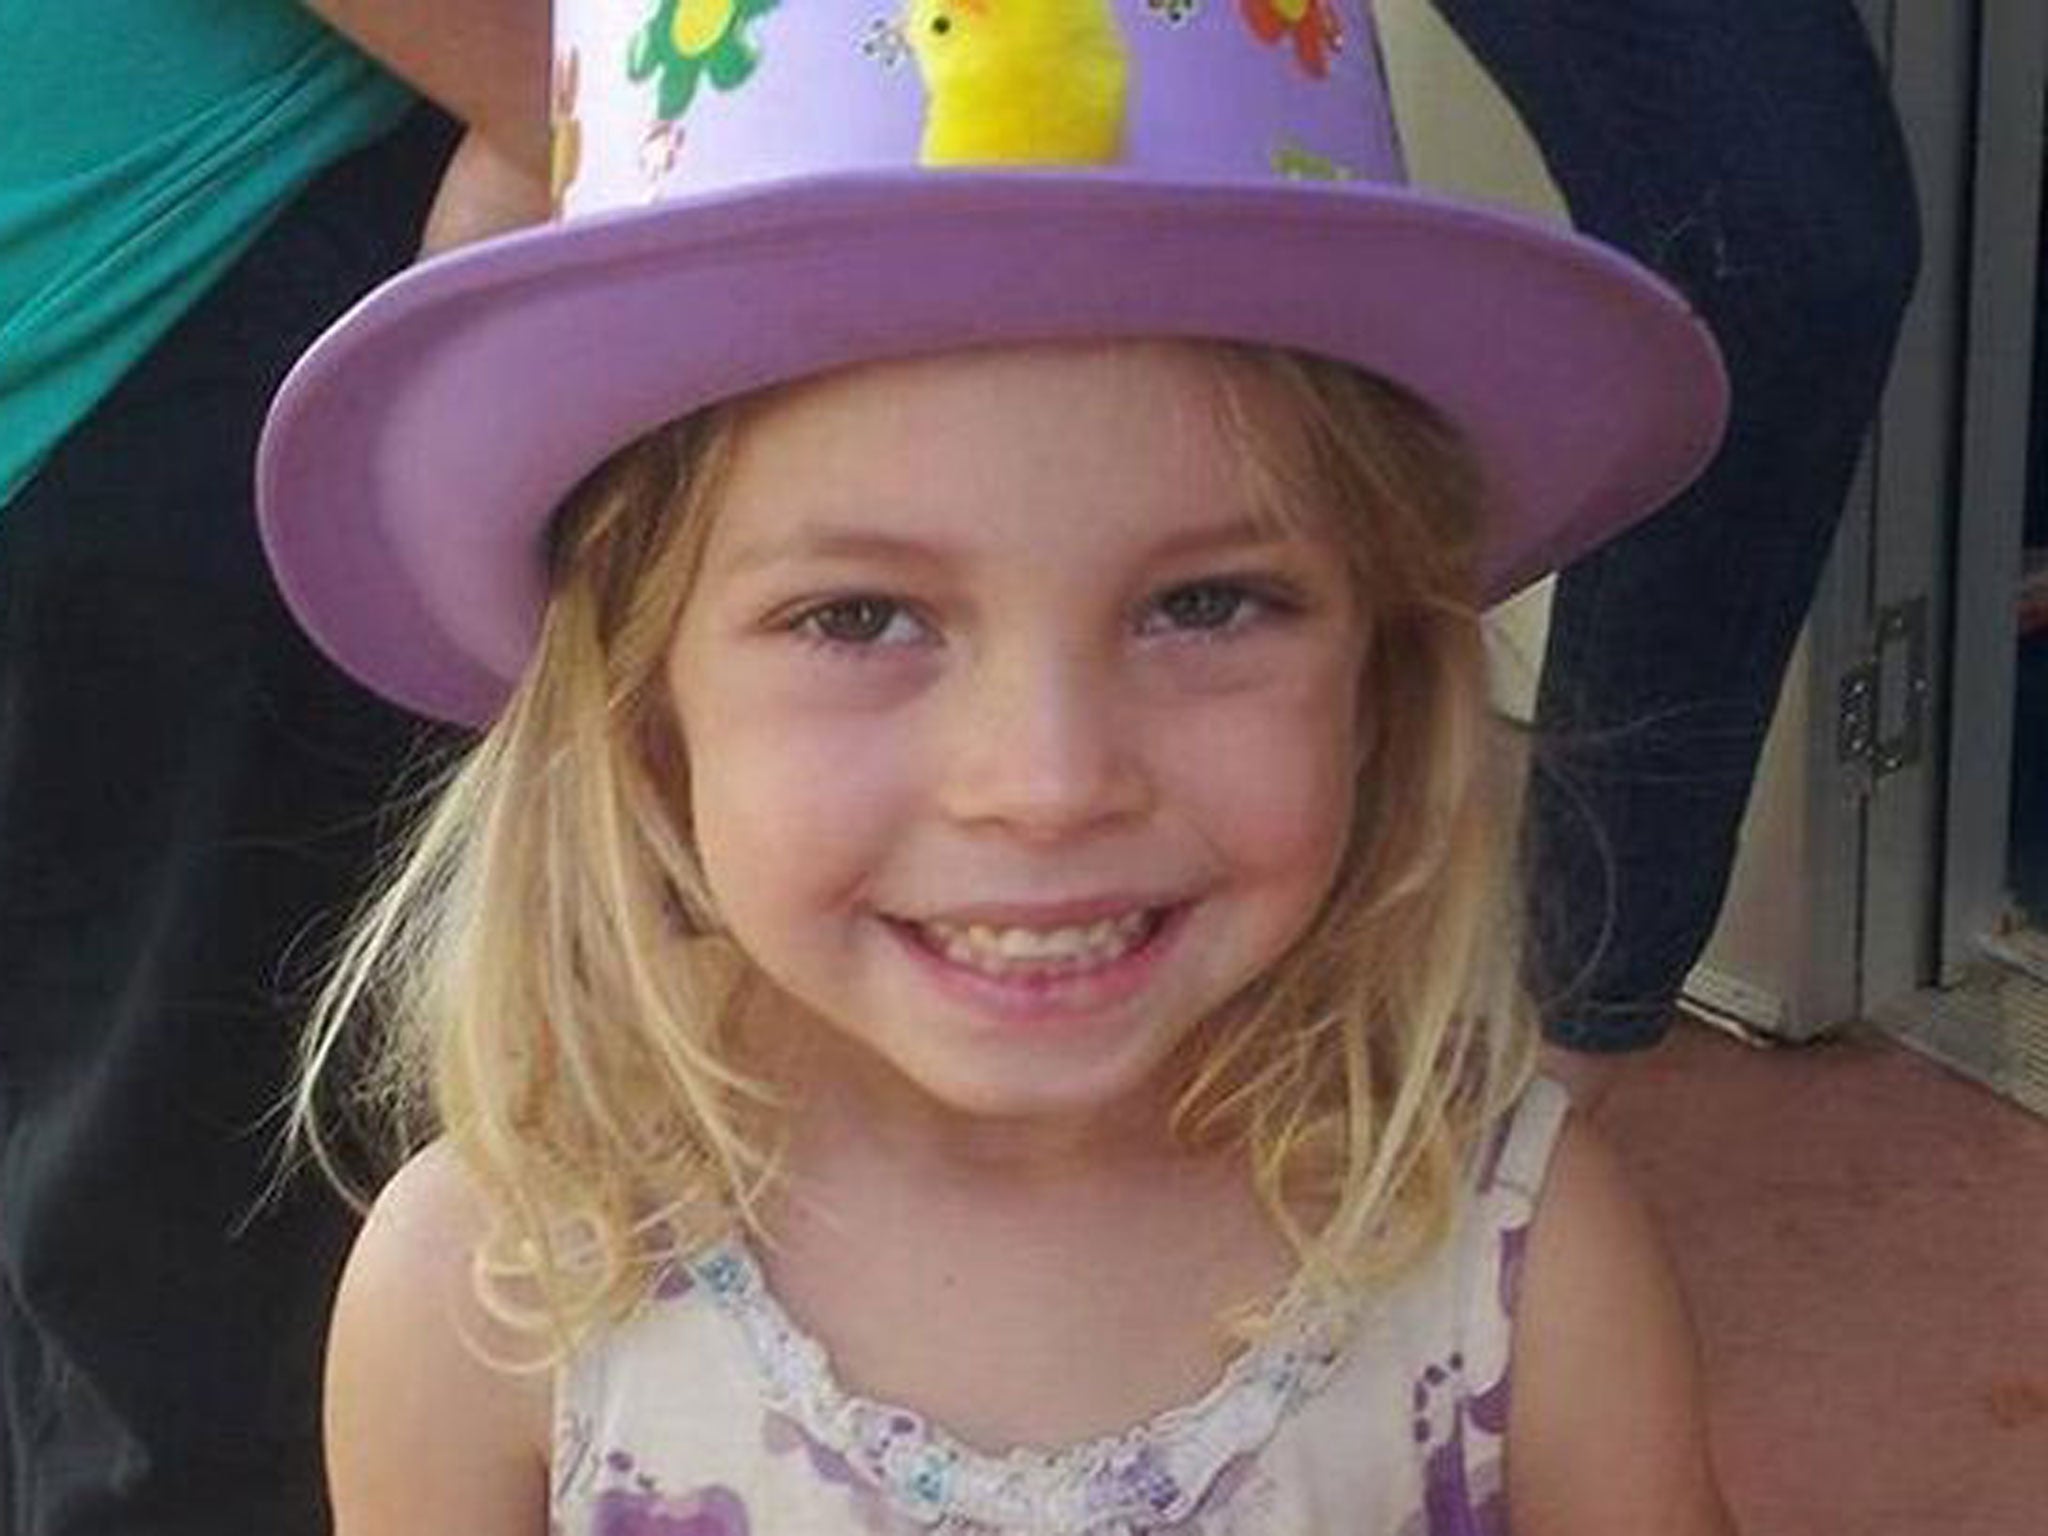 Chloe Campbell was found missing from her home in Childers, Queensland, on Thursday morning